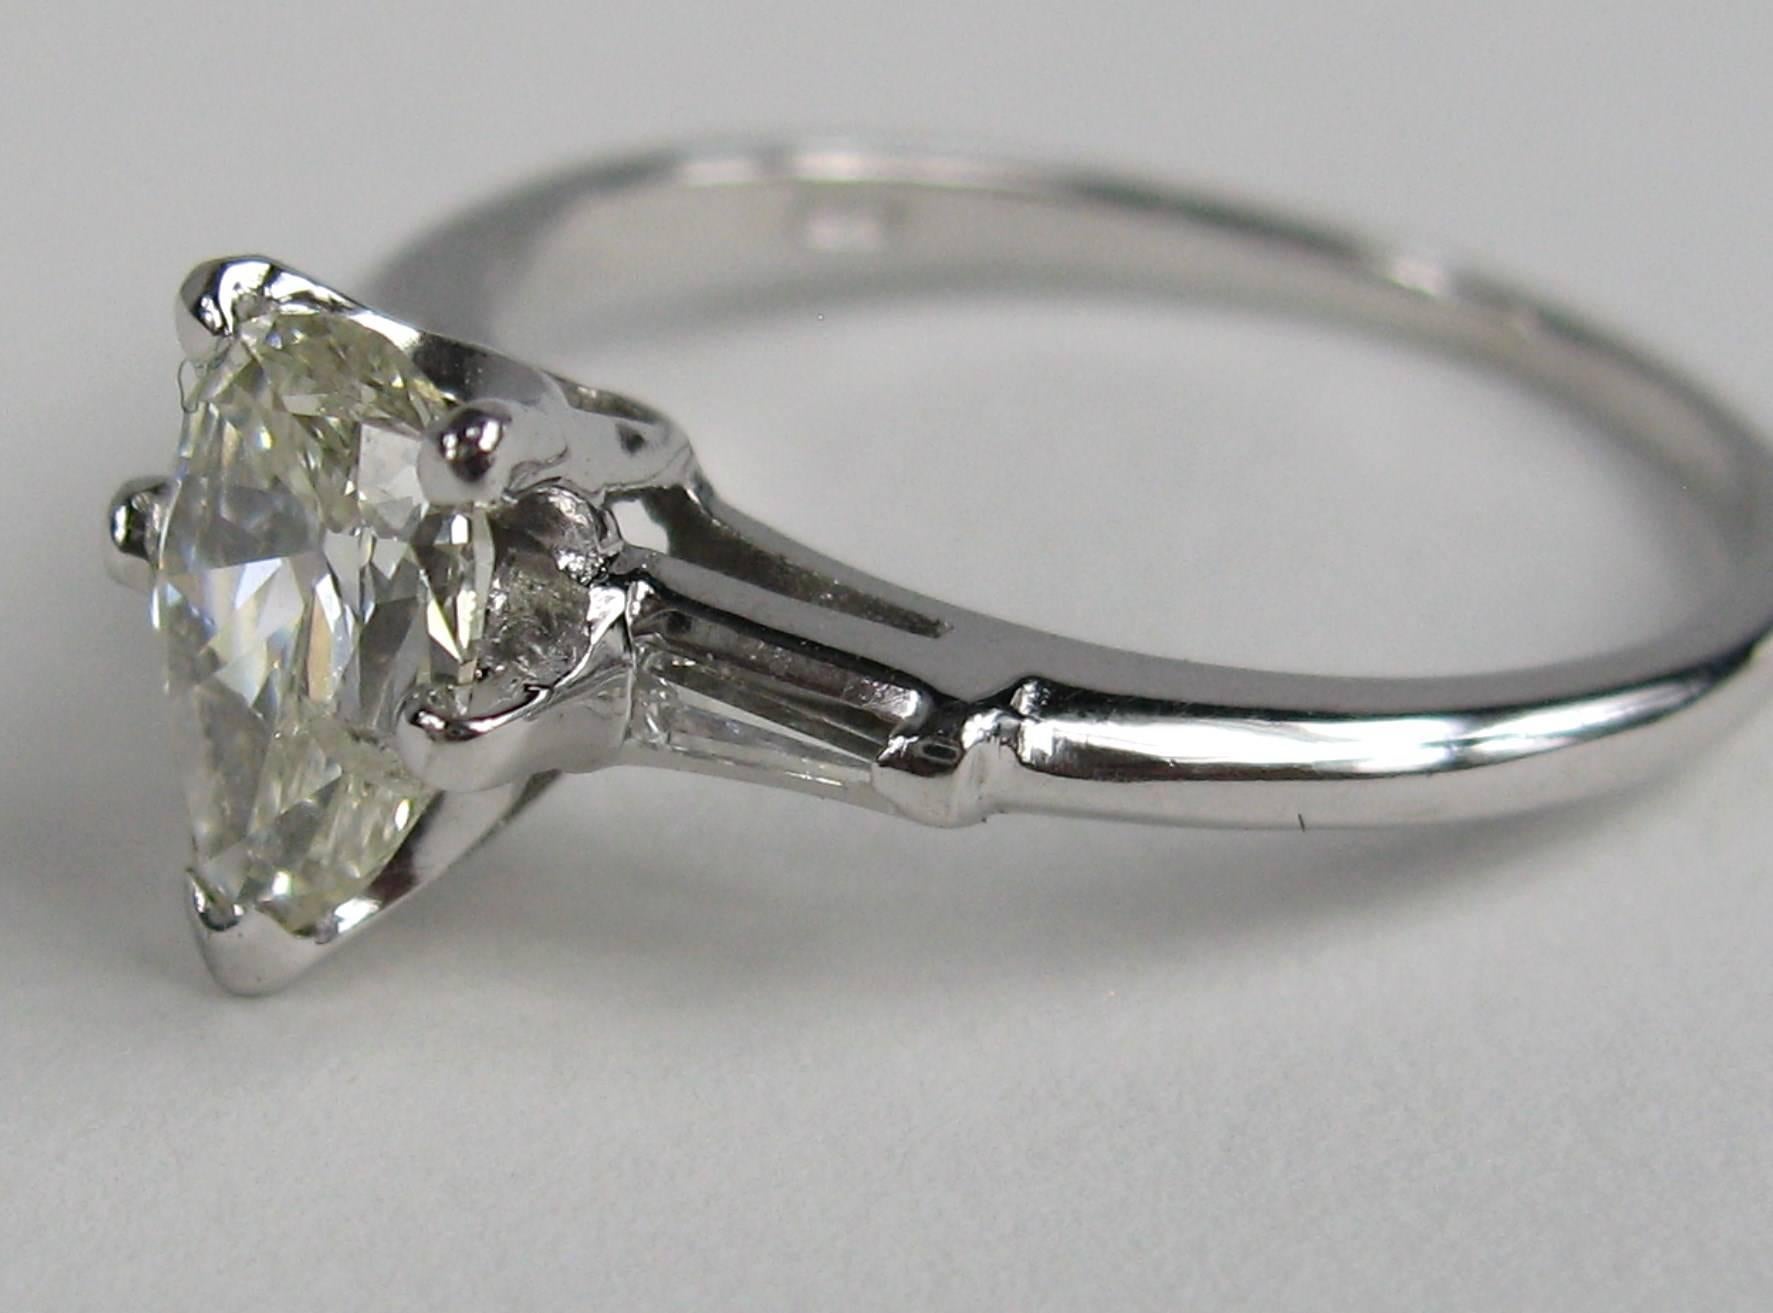 1 Carat 14 Karat White Gold Diamond Engagement Ring In Good Condition For Sale In Wallkill, NY